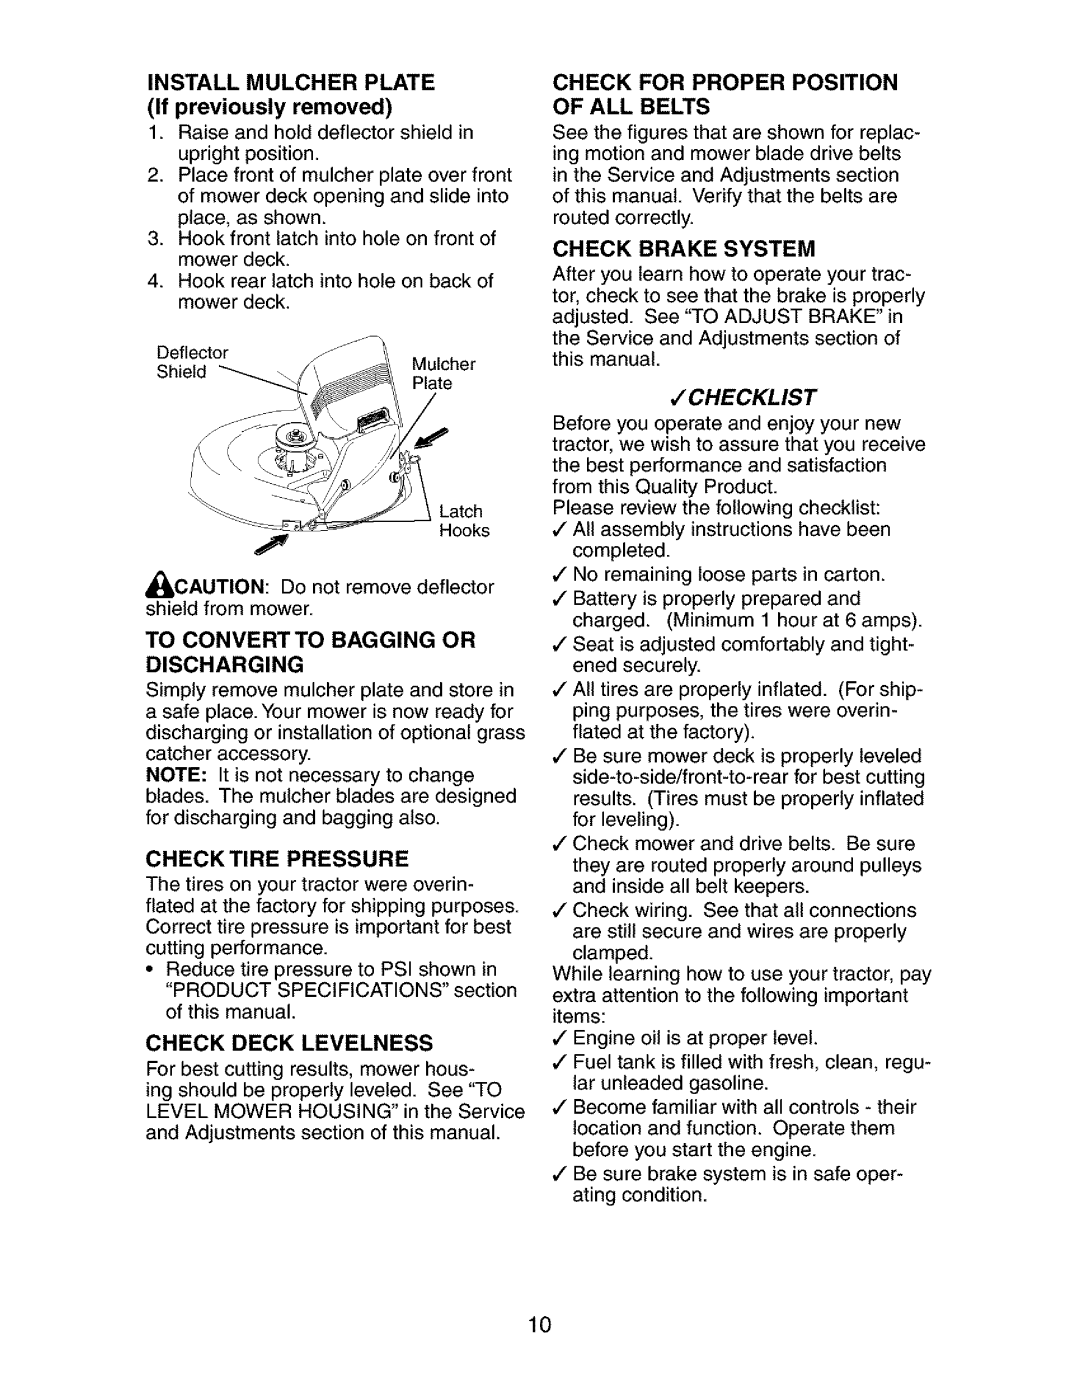 Craftsman 917.273392 manual Jchecklist, INSTALL MULCHER PLATE If previously removed, Discharging, Check Tire Pressure 